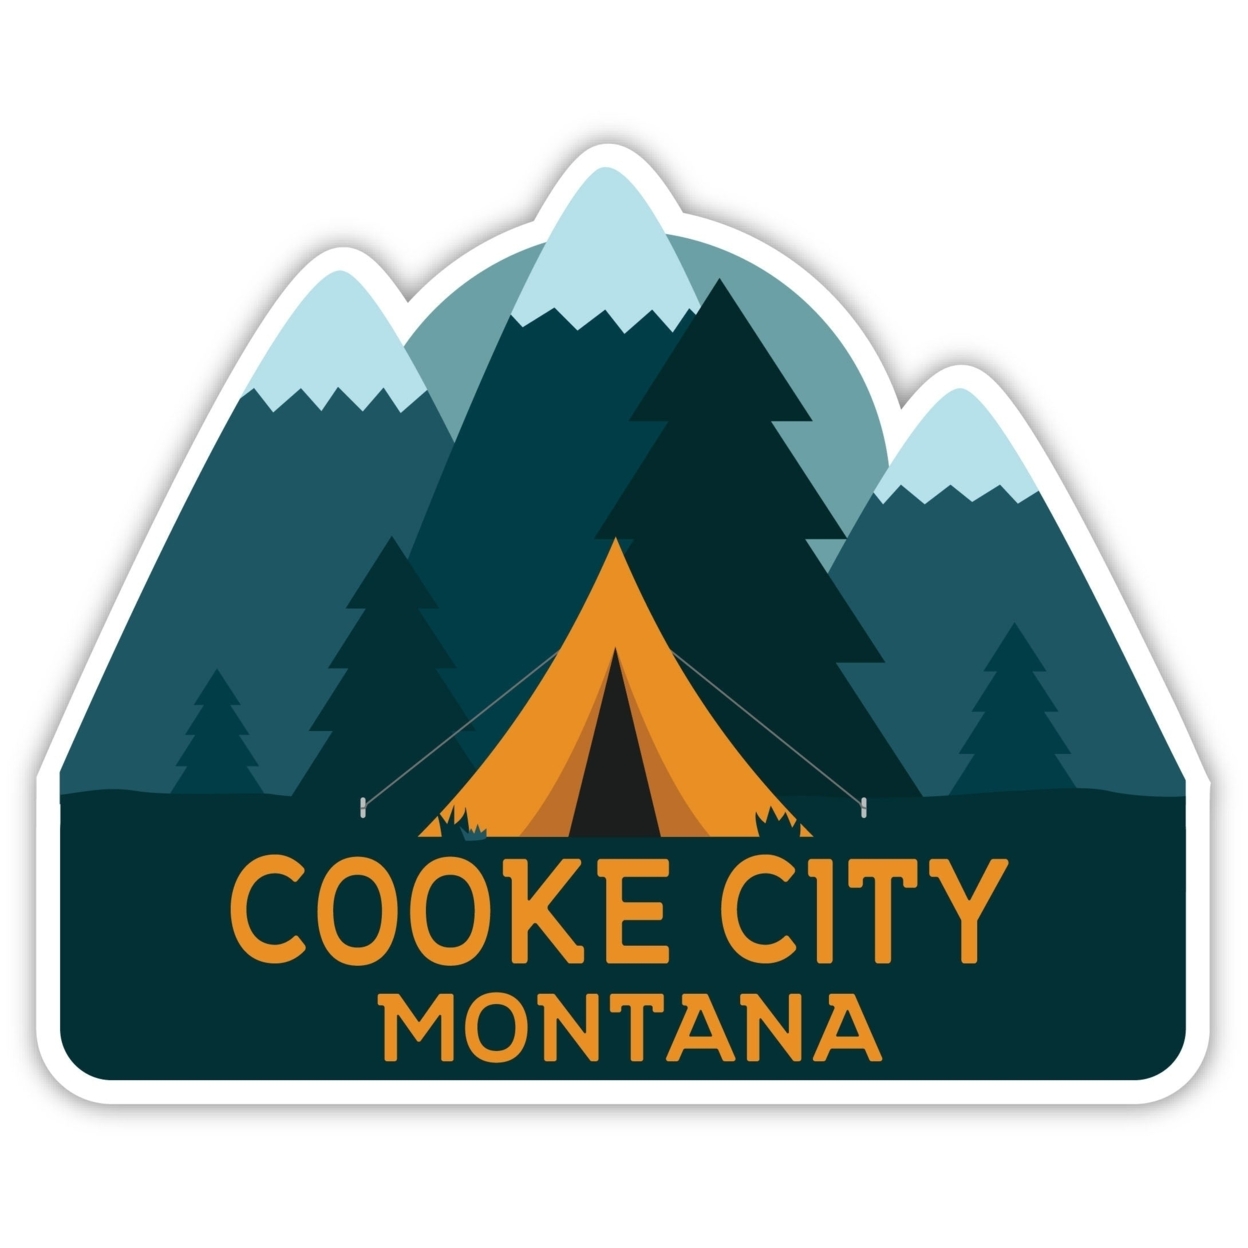 Cooke City Montana Souvenir Decorative Stickers (Choose Theme And Size) - 4-Pack, 8-Inch, Tent